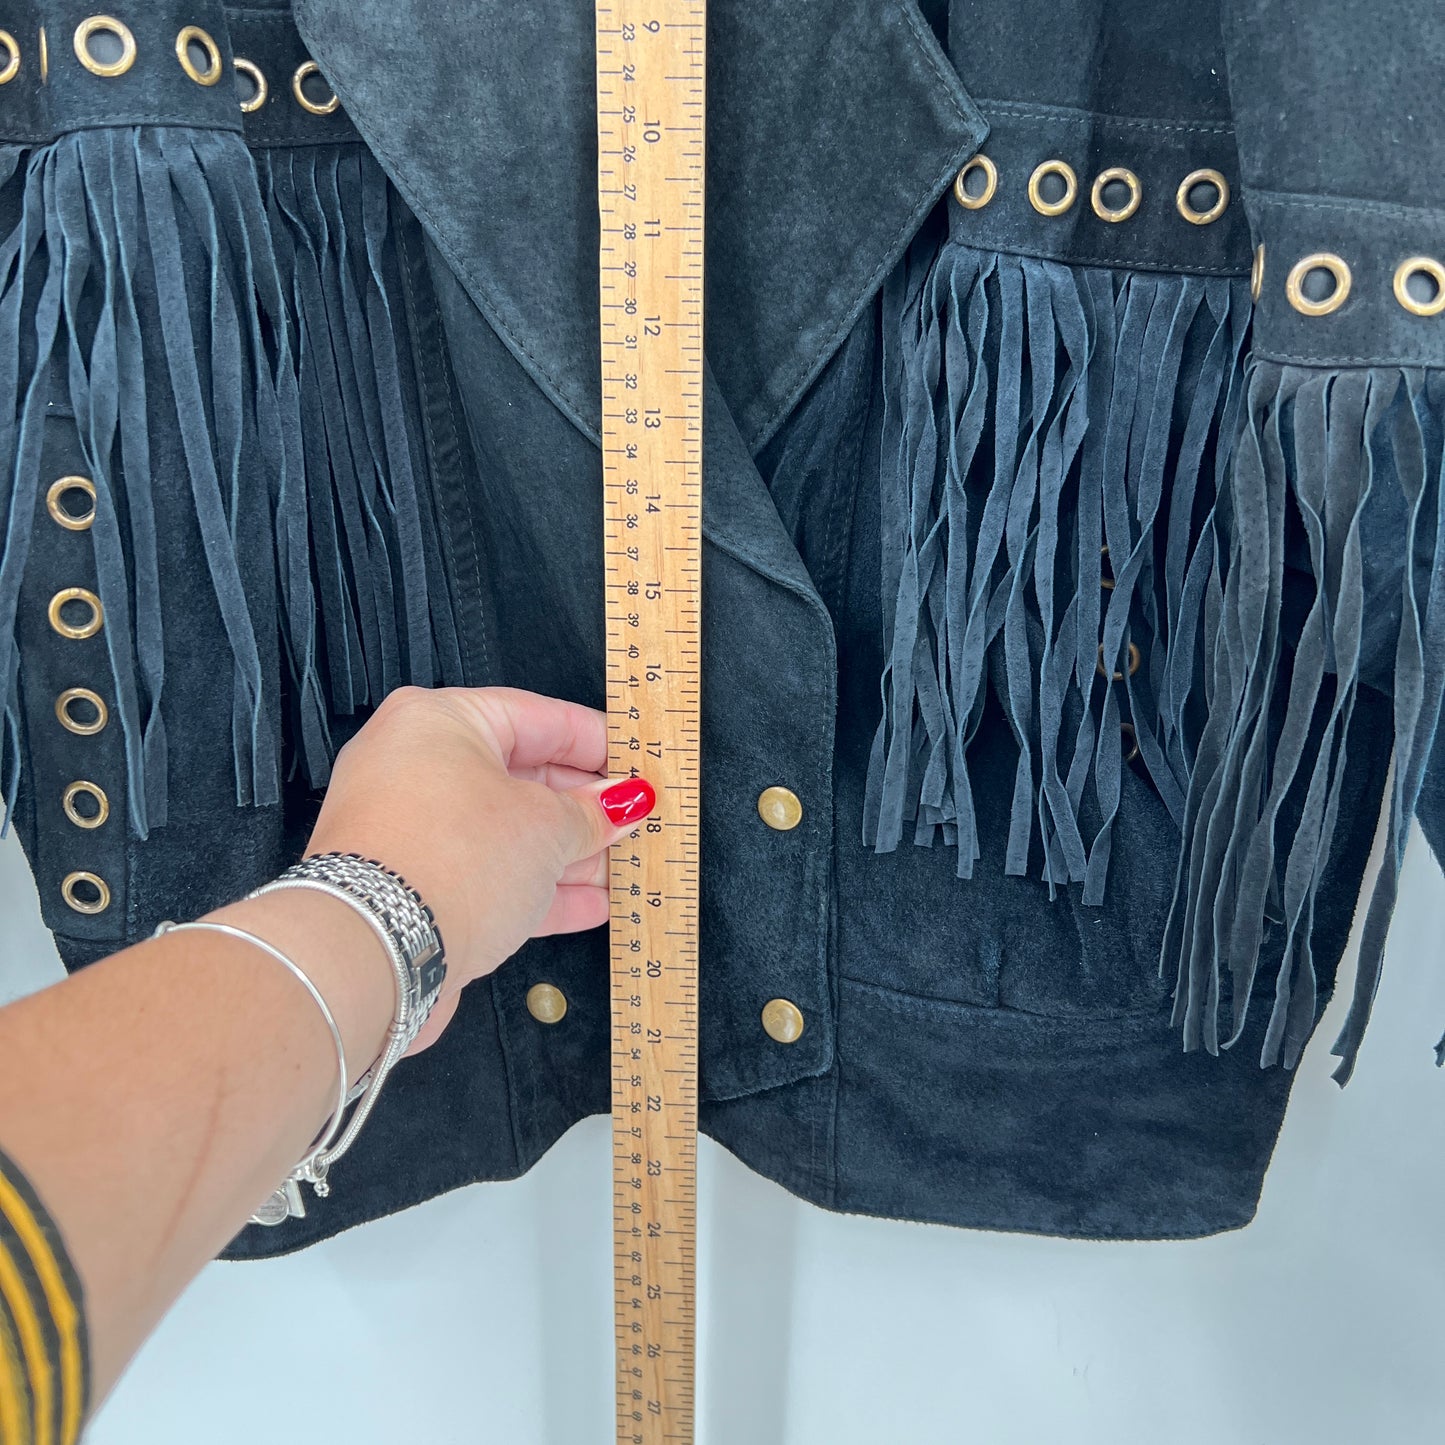 SOLD. Vintage Very Trendy Cropped Fringed Leather Jacket M